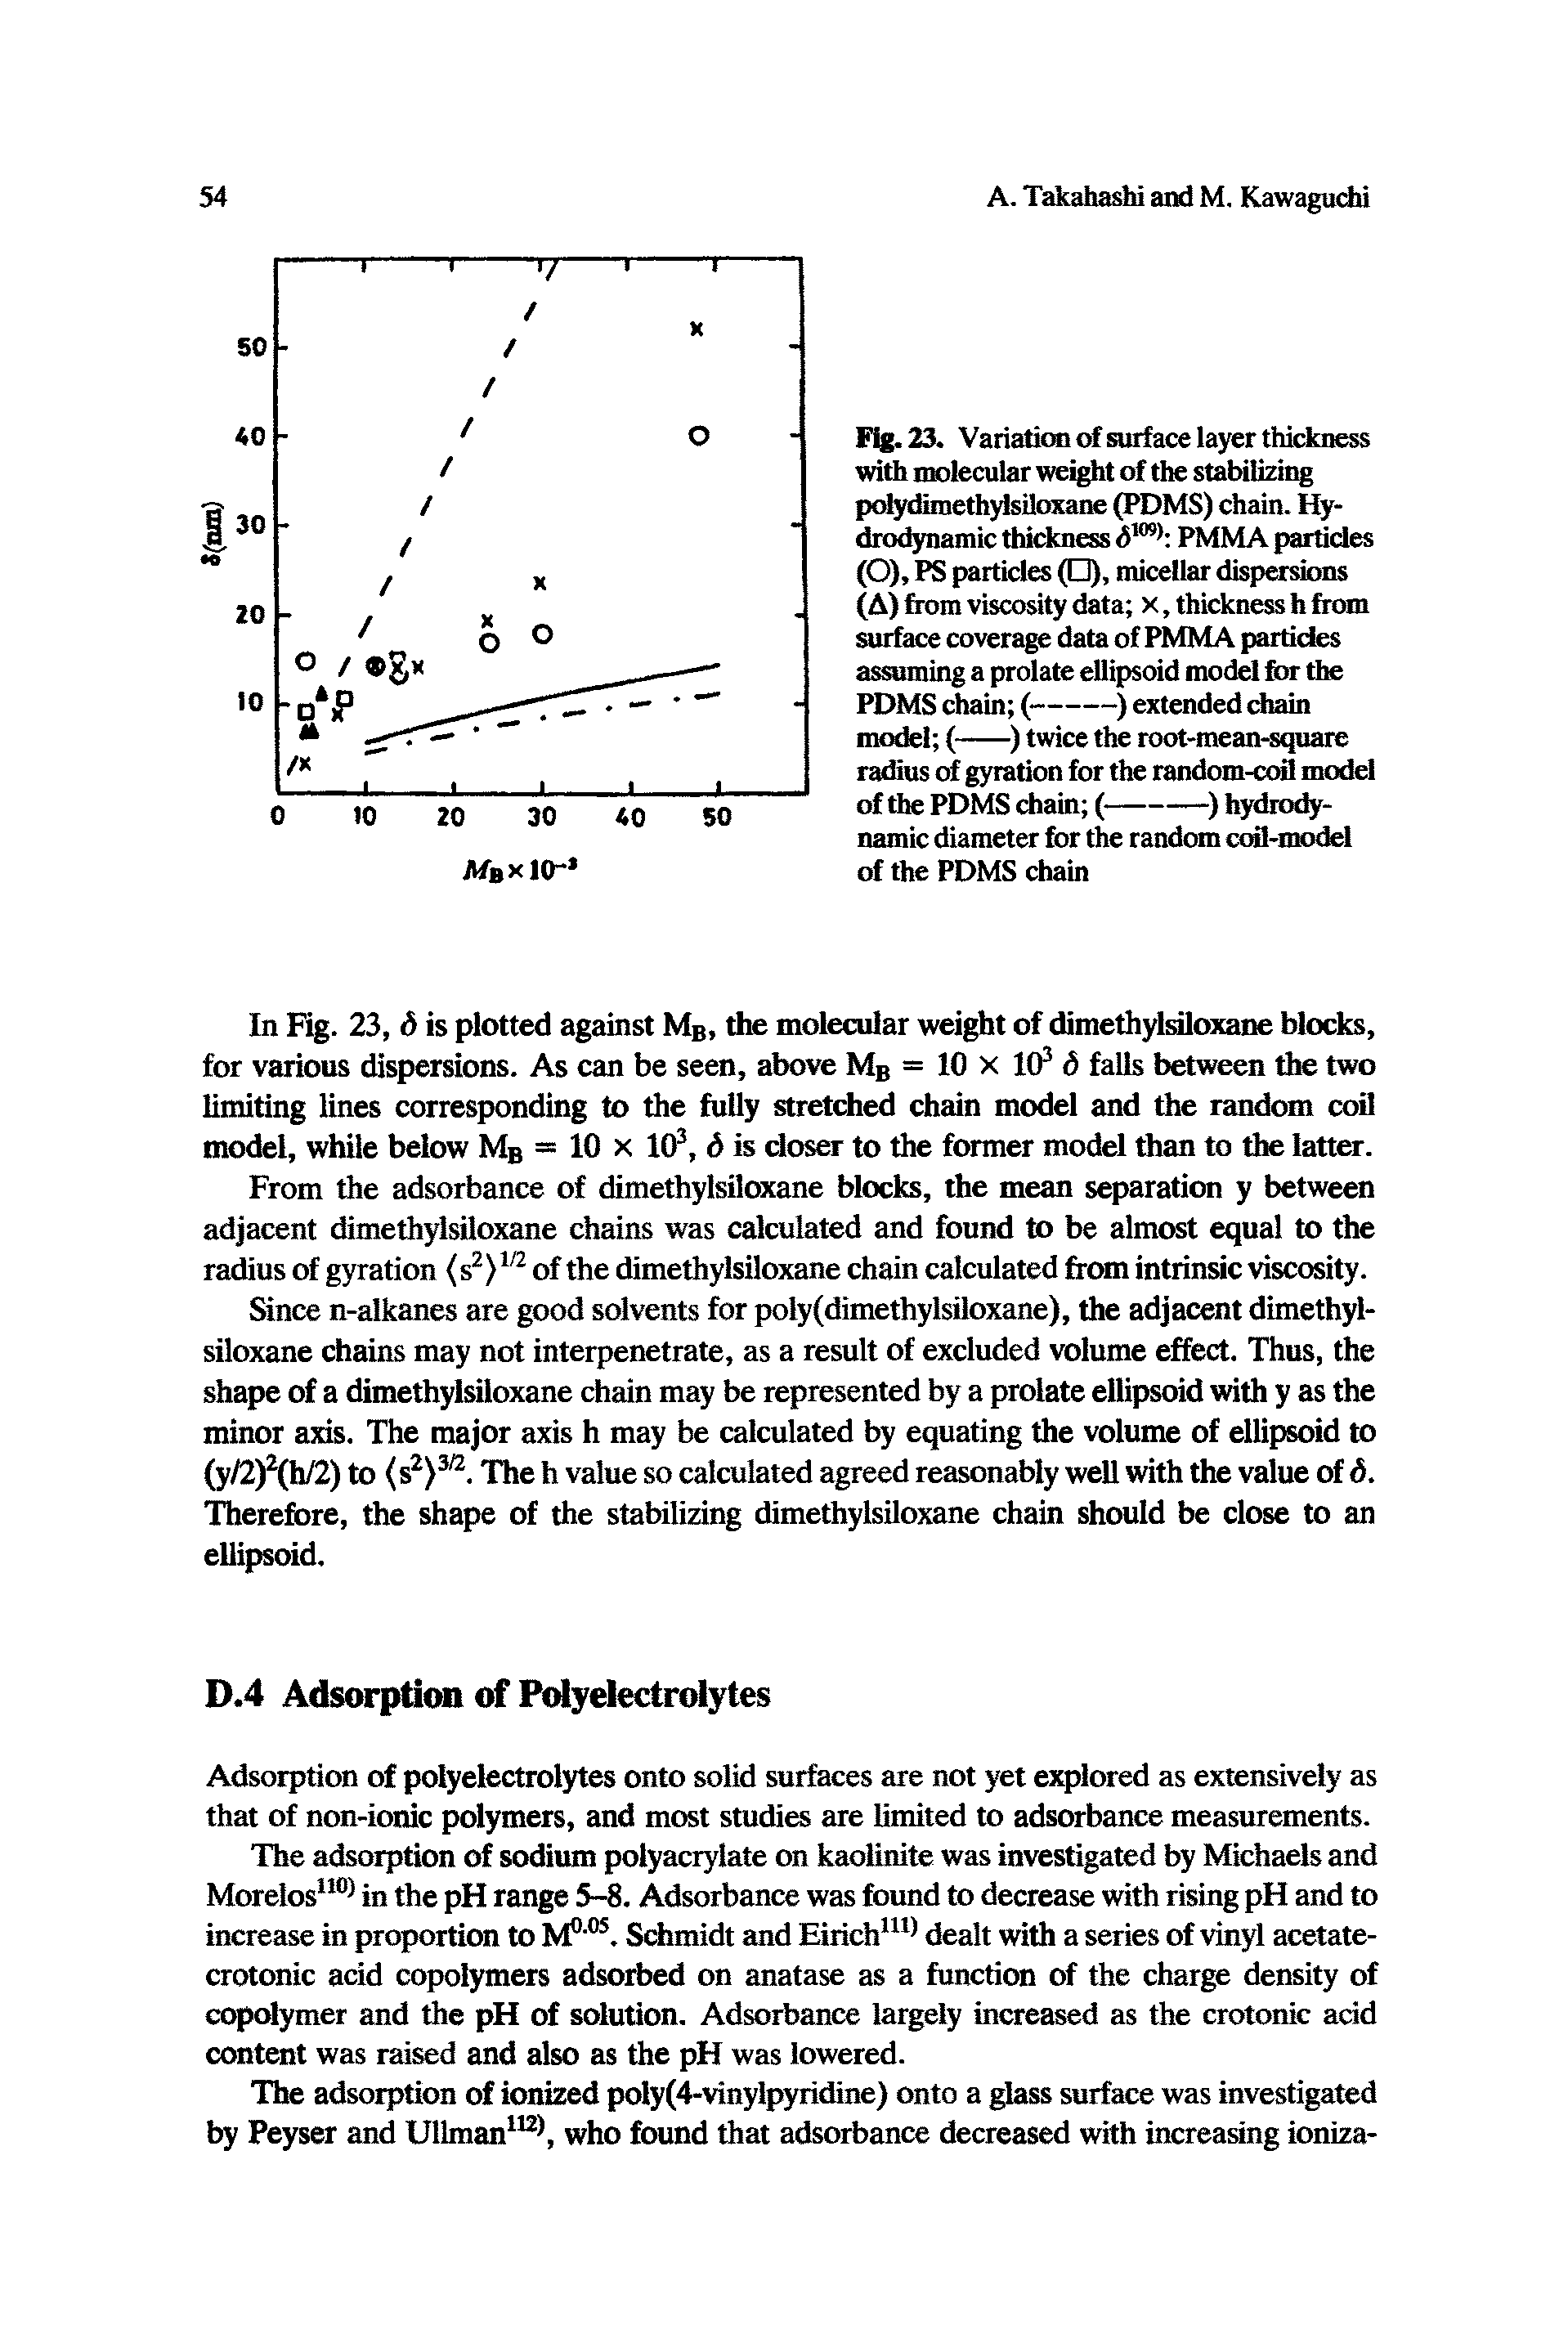 Fig. 23. Variation of surface layer thickness with molecular weight of the stabilizing polydimethylsiloxane (PDMS) chain. Hydrodynamic thickness <5109) PMMA particles (O), PS particles ( ), micellar dispersions (A) from viscosity data x, thickness h from surface coverage data of PMMA particles assuming a prolate ellipsoid model for the...